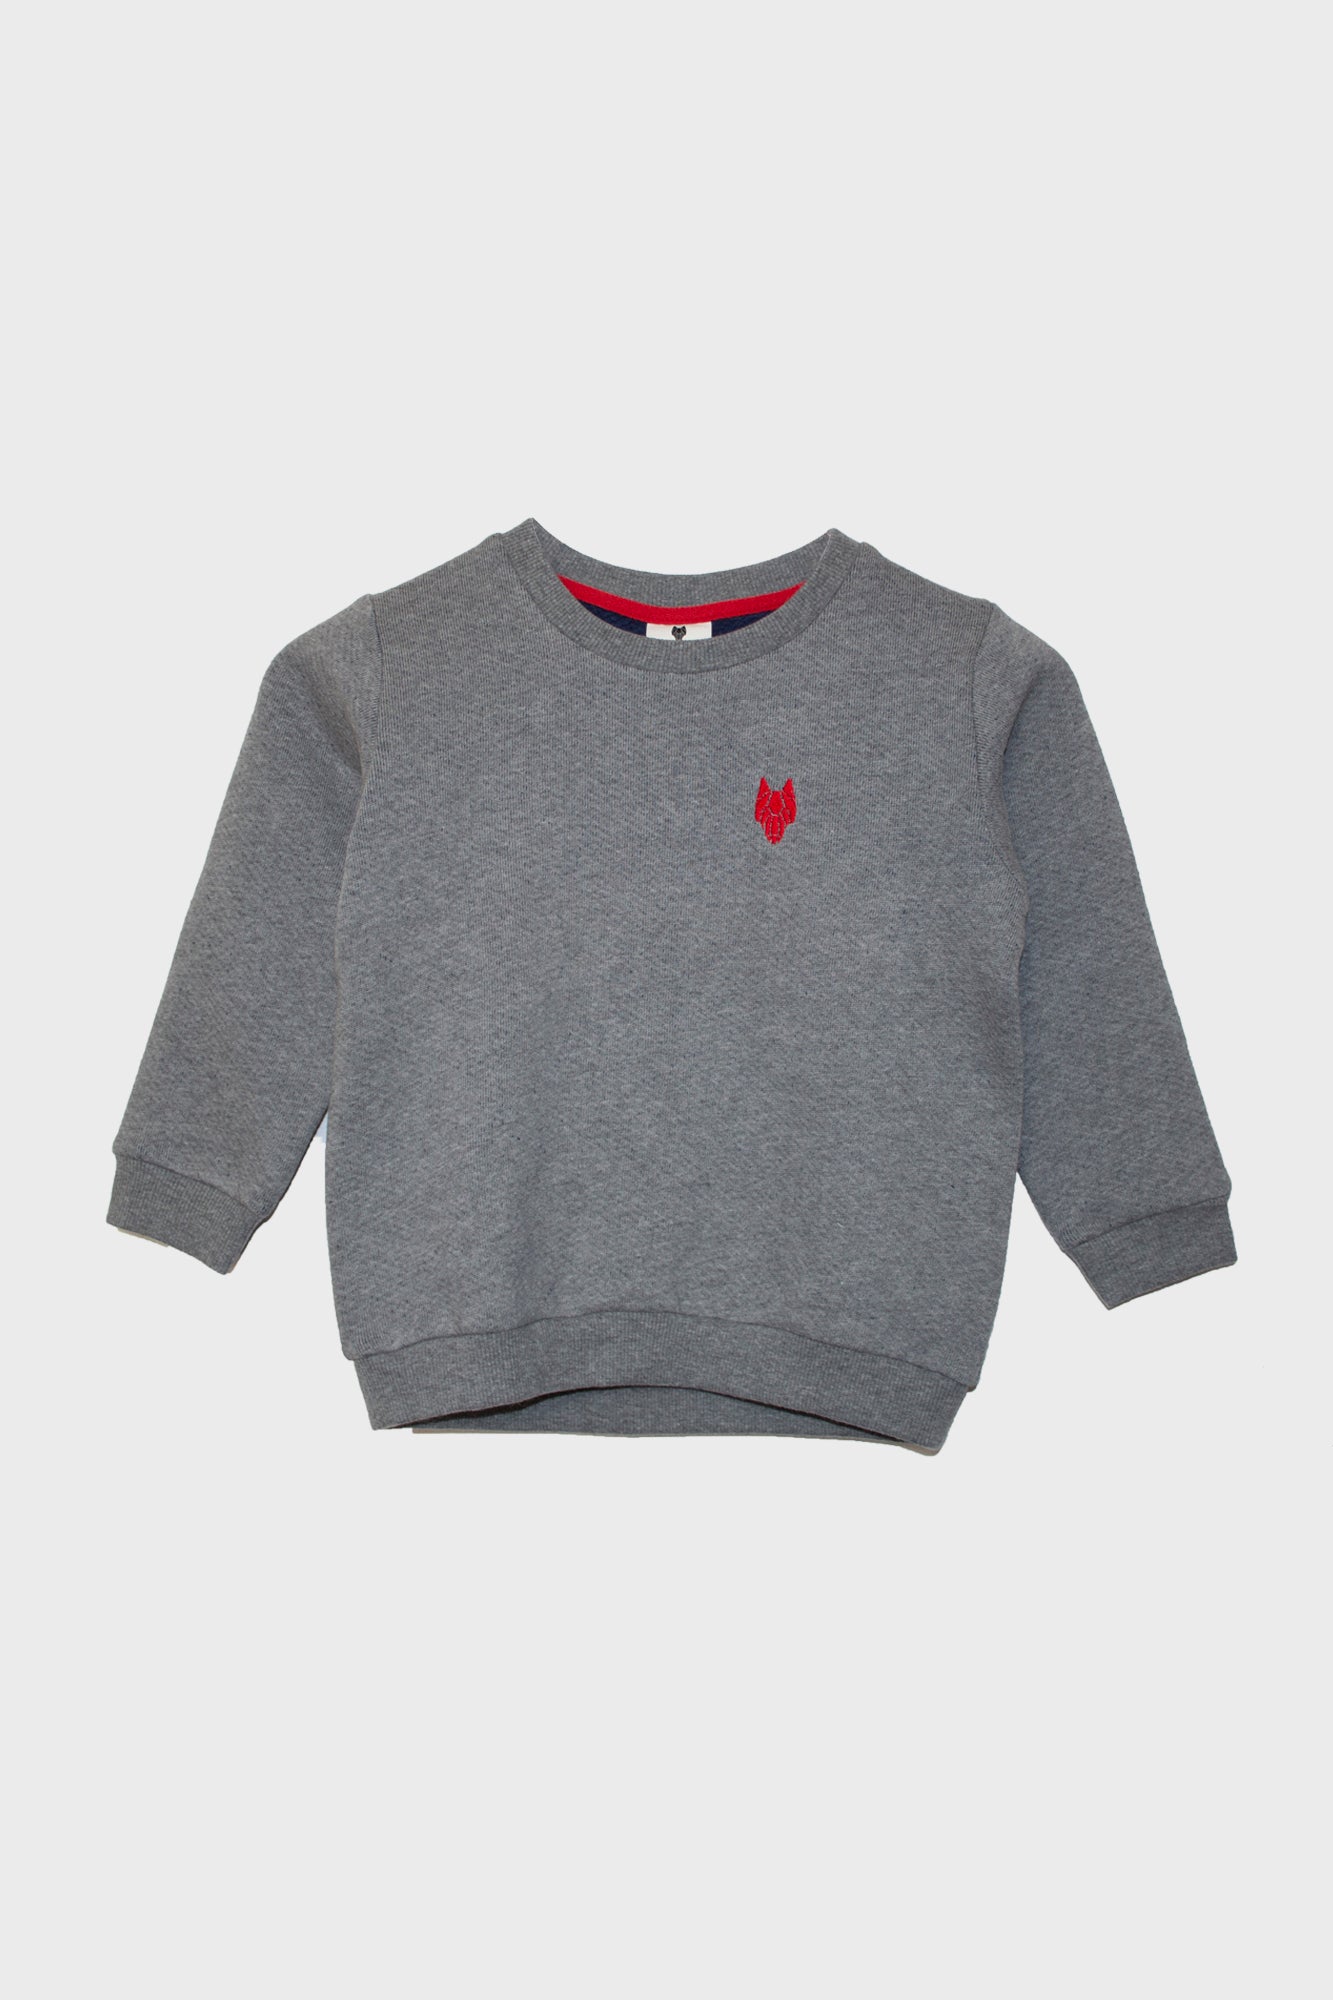 Kid’s One Wolf sweater, grey/blue inside with red logo